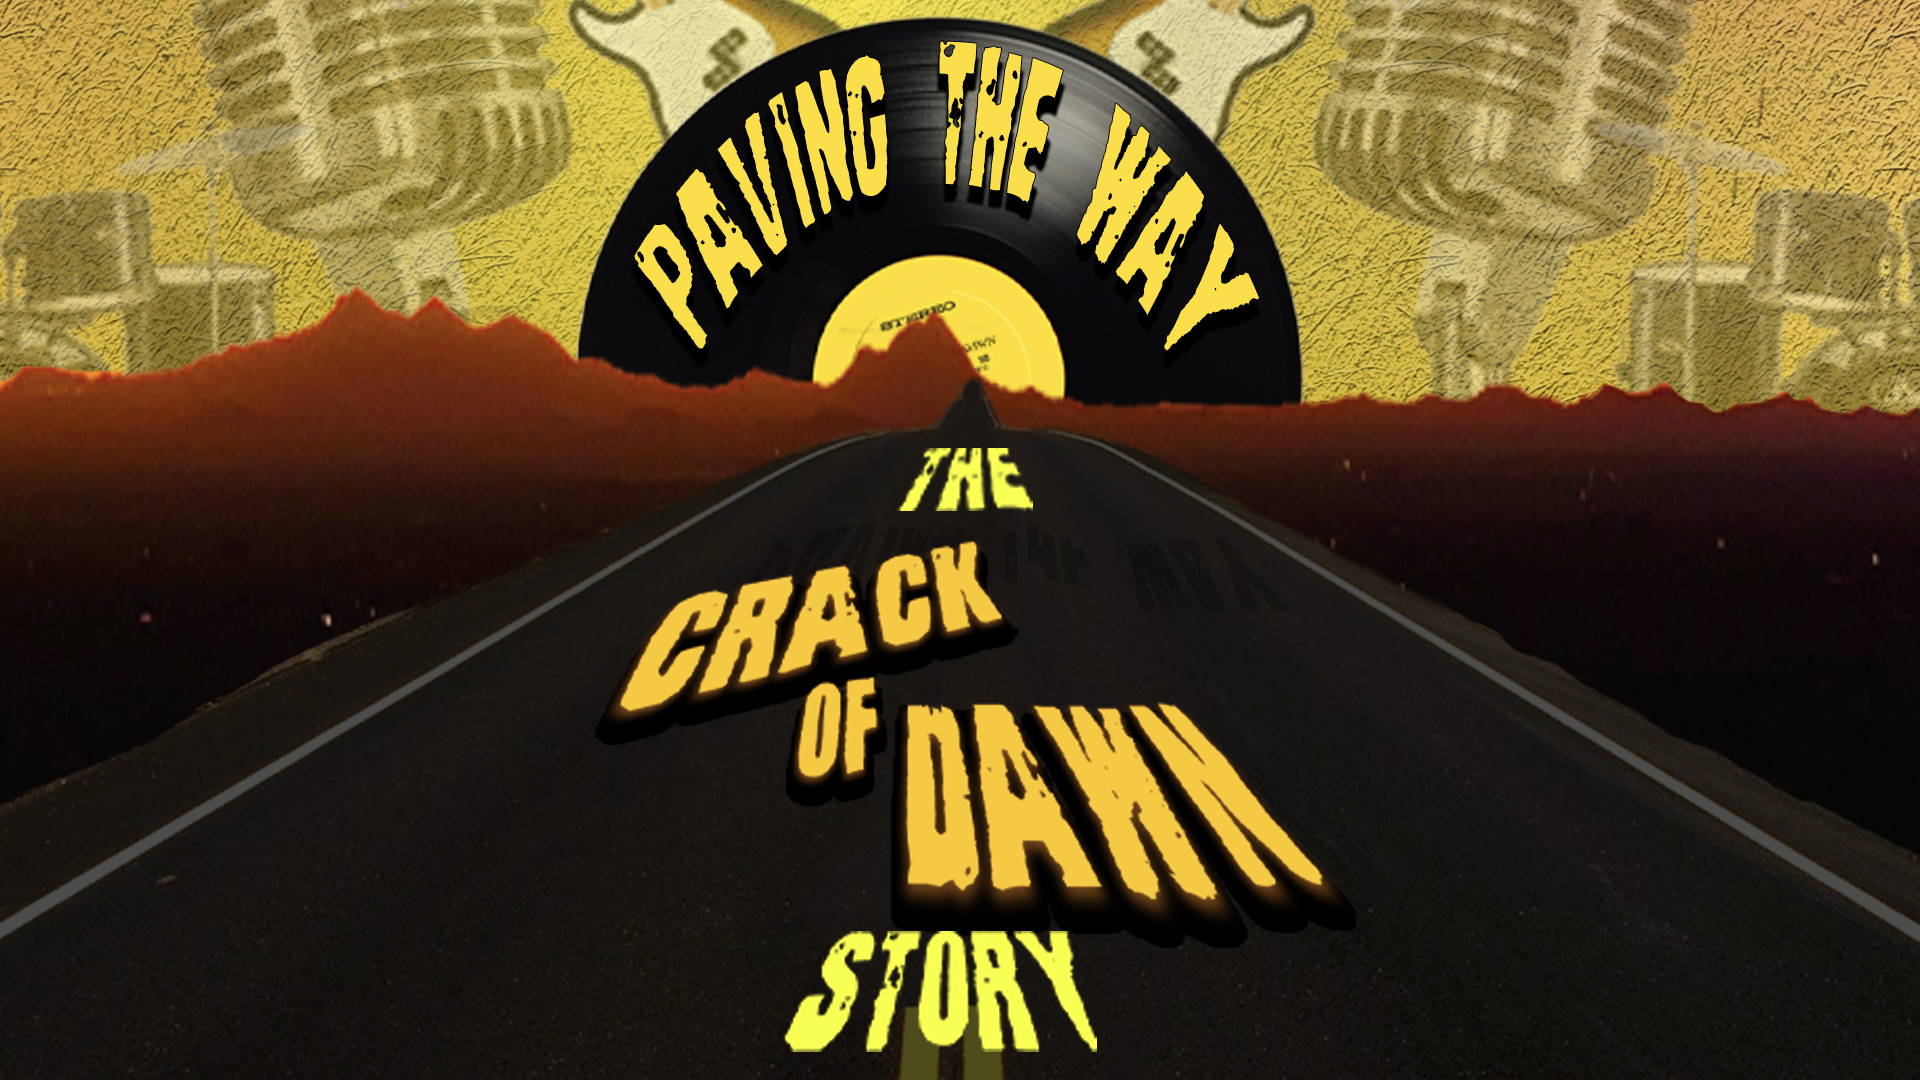 Paving The Way: The Crack Of Dawn Story